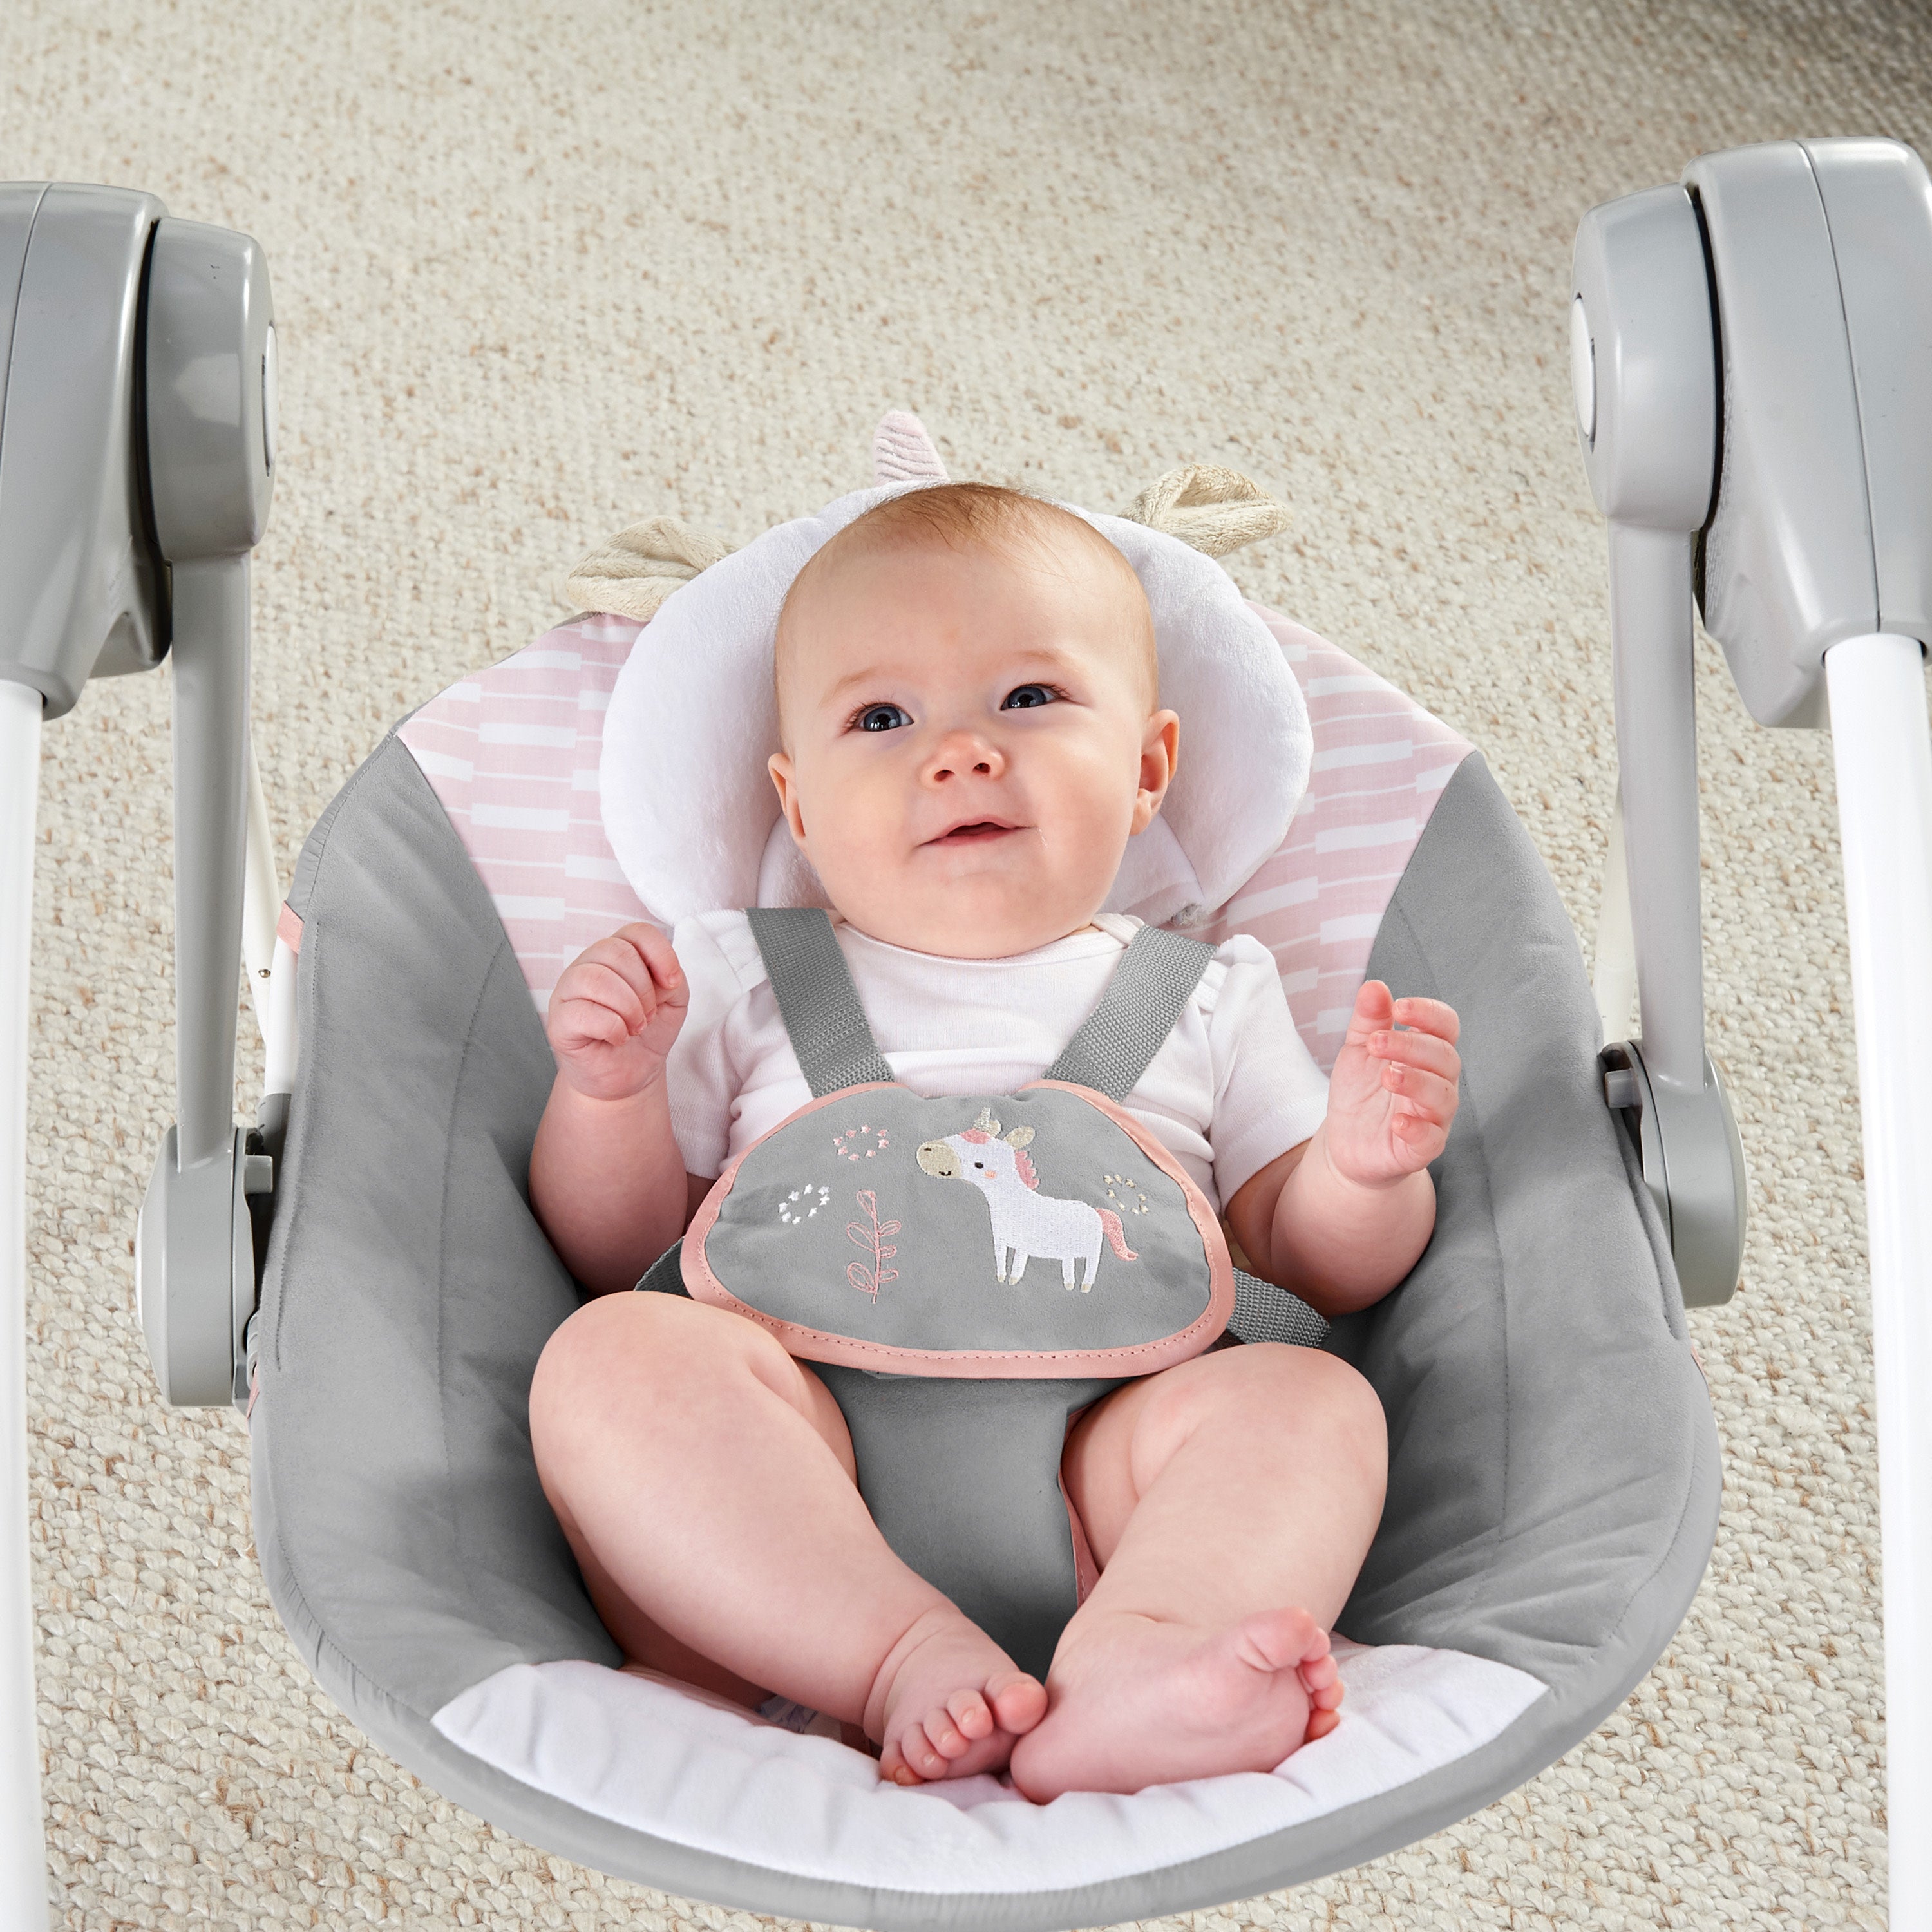 Ingenuity Comfort 2 Go Compact Portable Baby Swing with Music - Flora